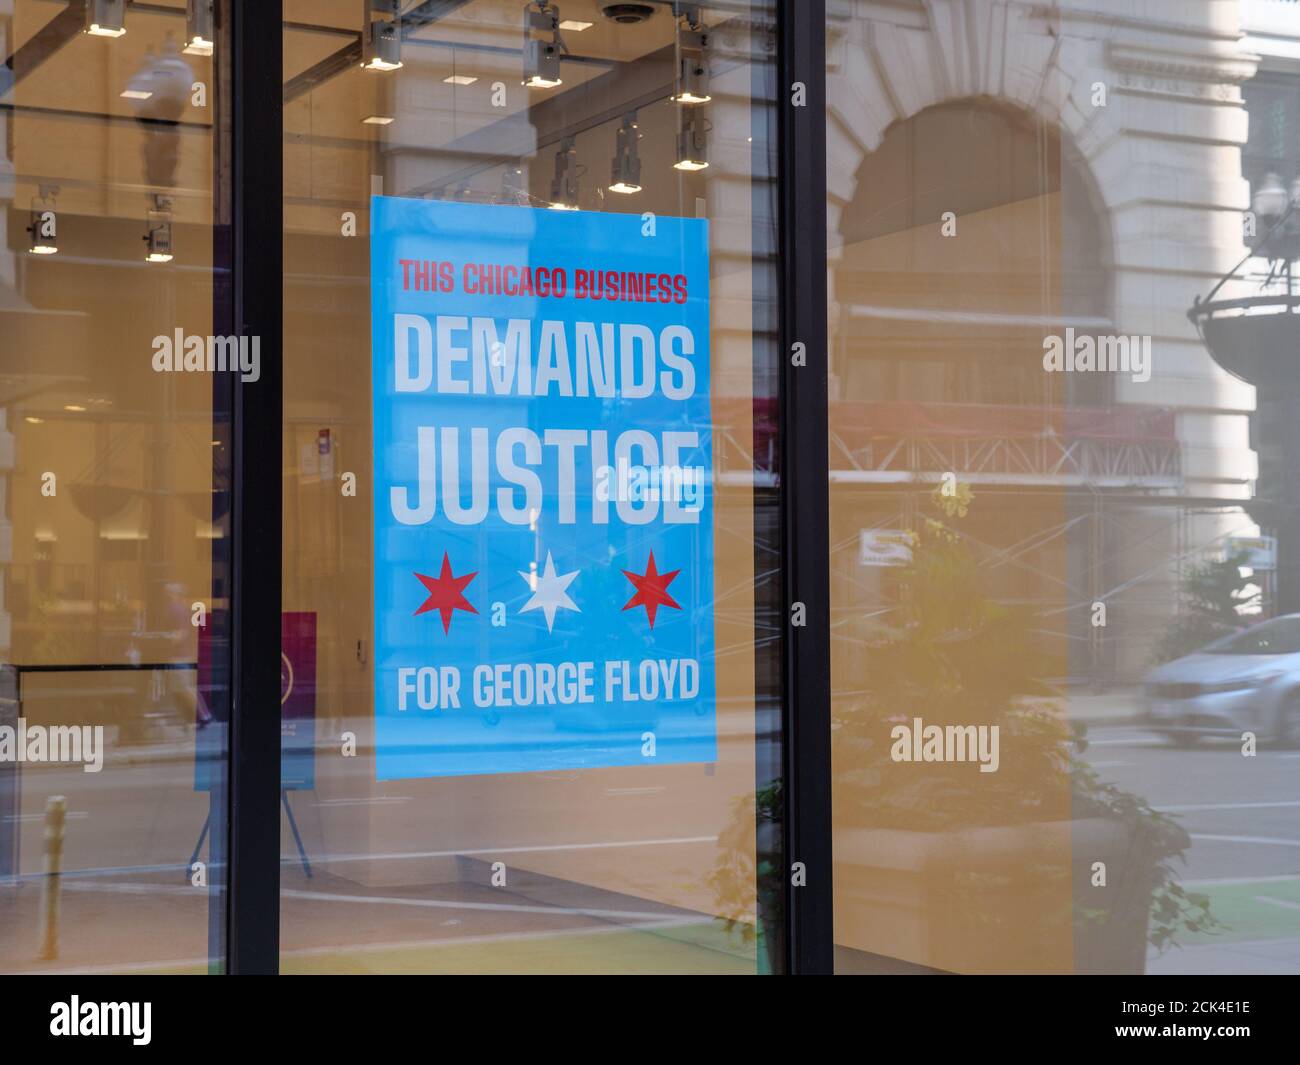 Chicago business demands justice for George Floyd sign. Stock Photo